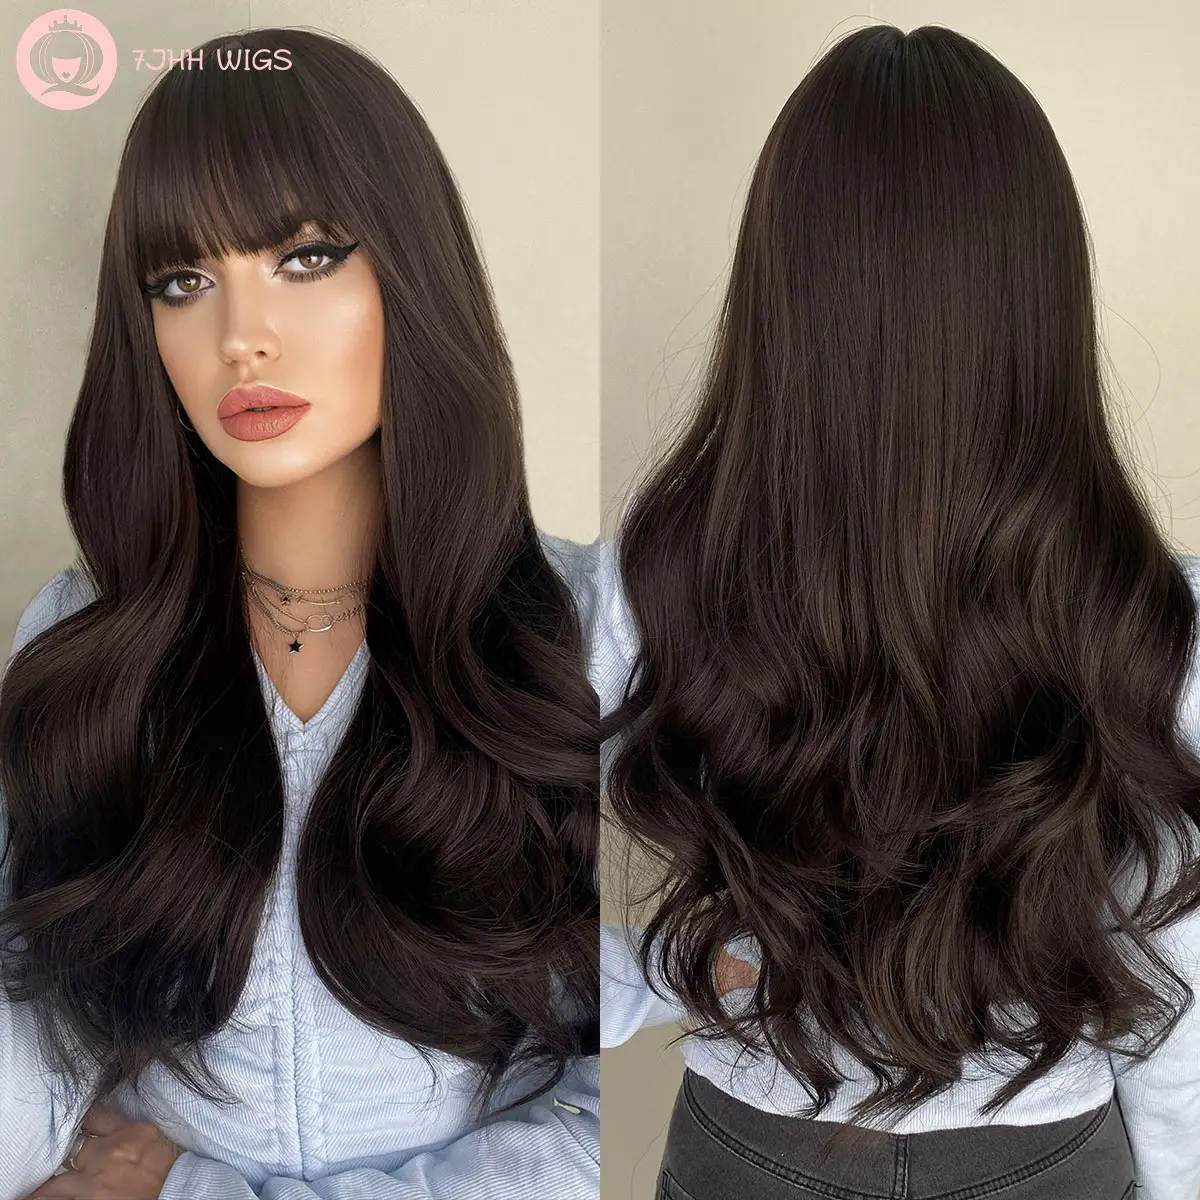 Natural Black Wig Long Curly Wig with Bangs for Women Dark Brown Long Wavy Wig Synthetic Hair Factory 26 Inches Hair